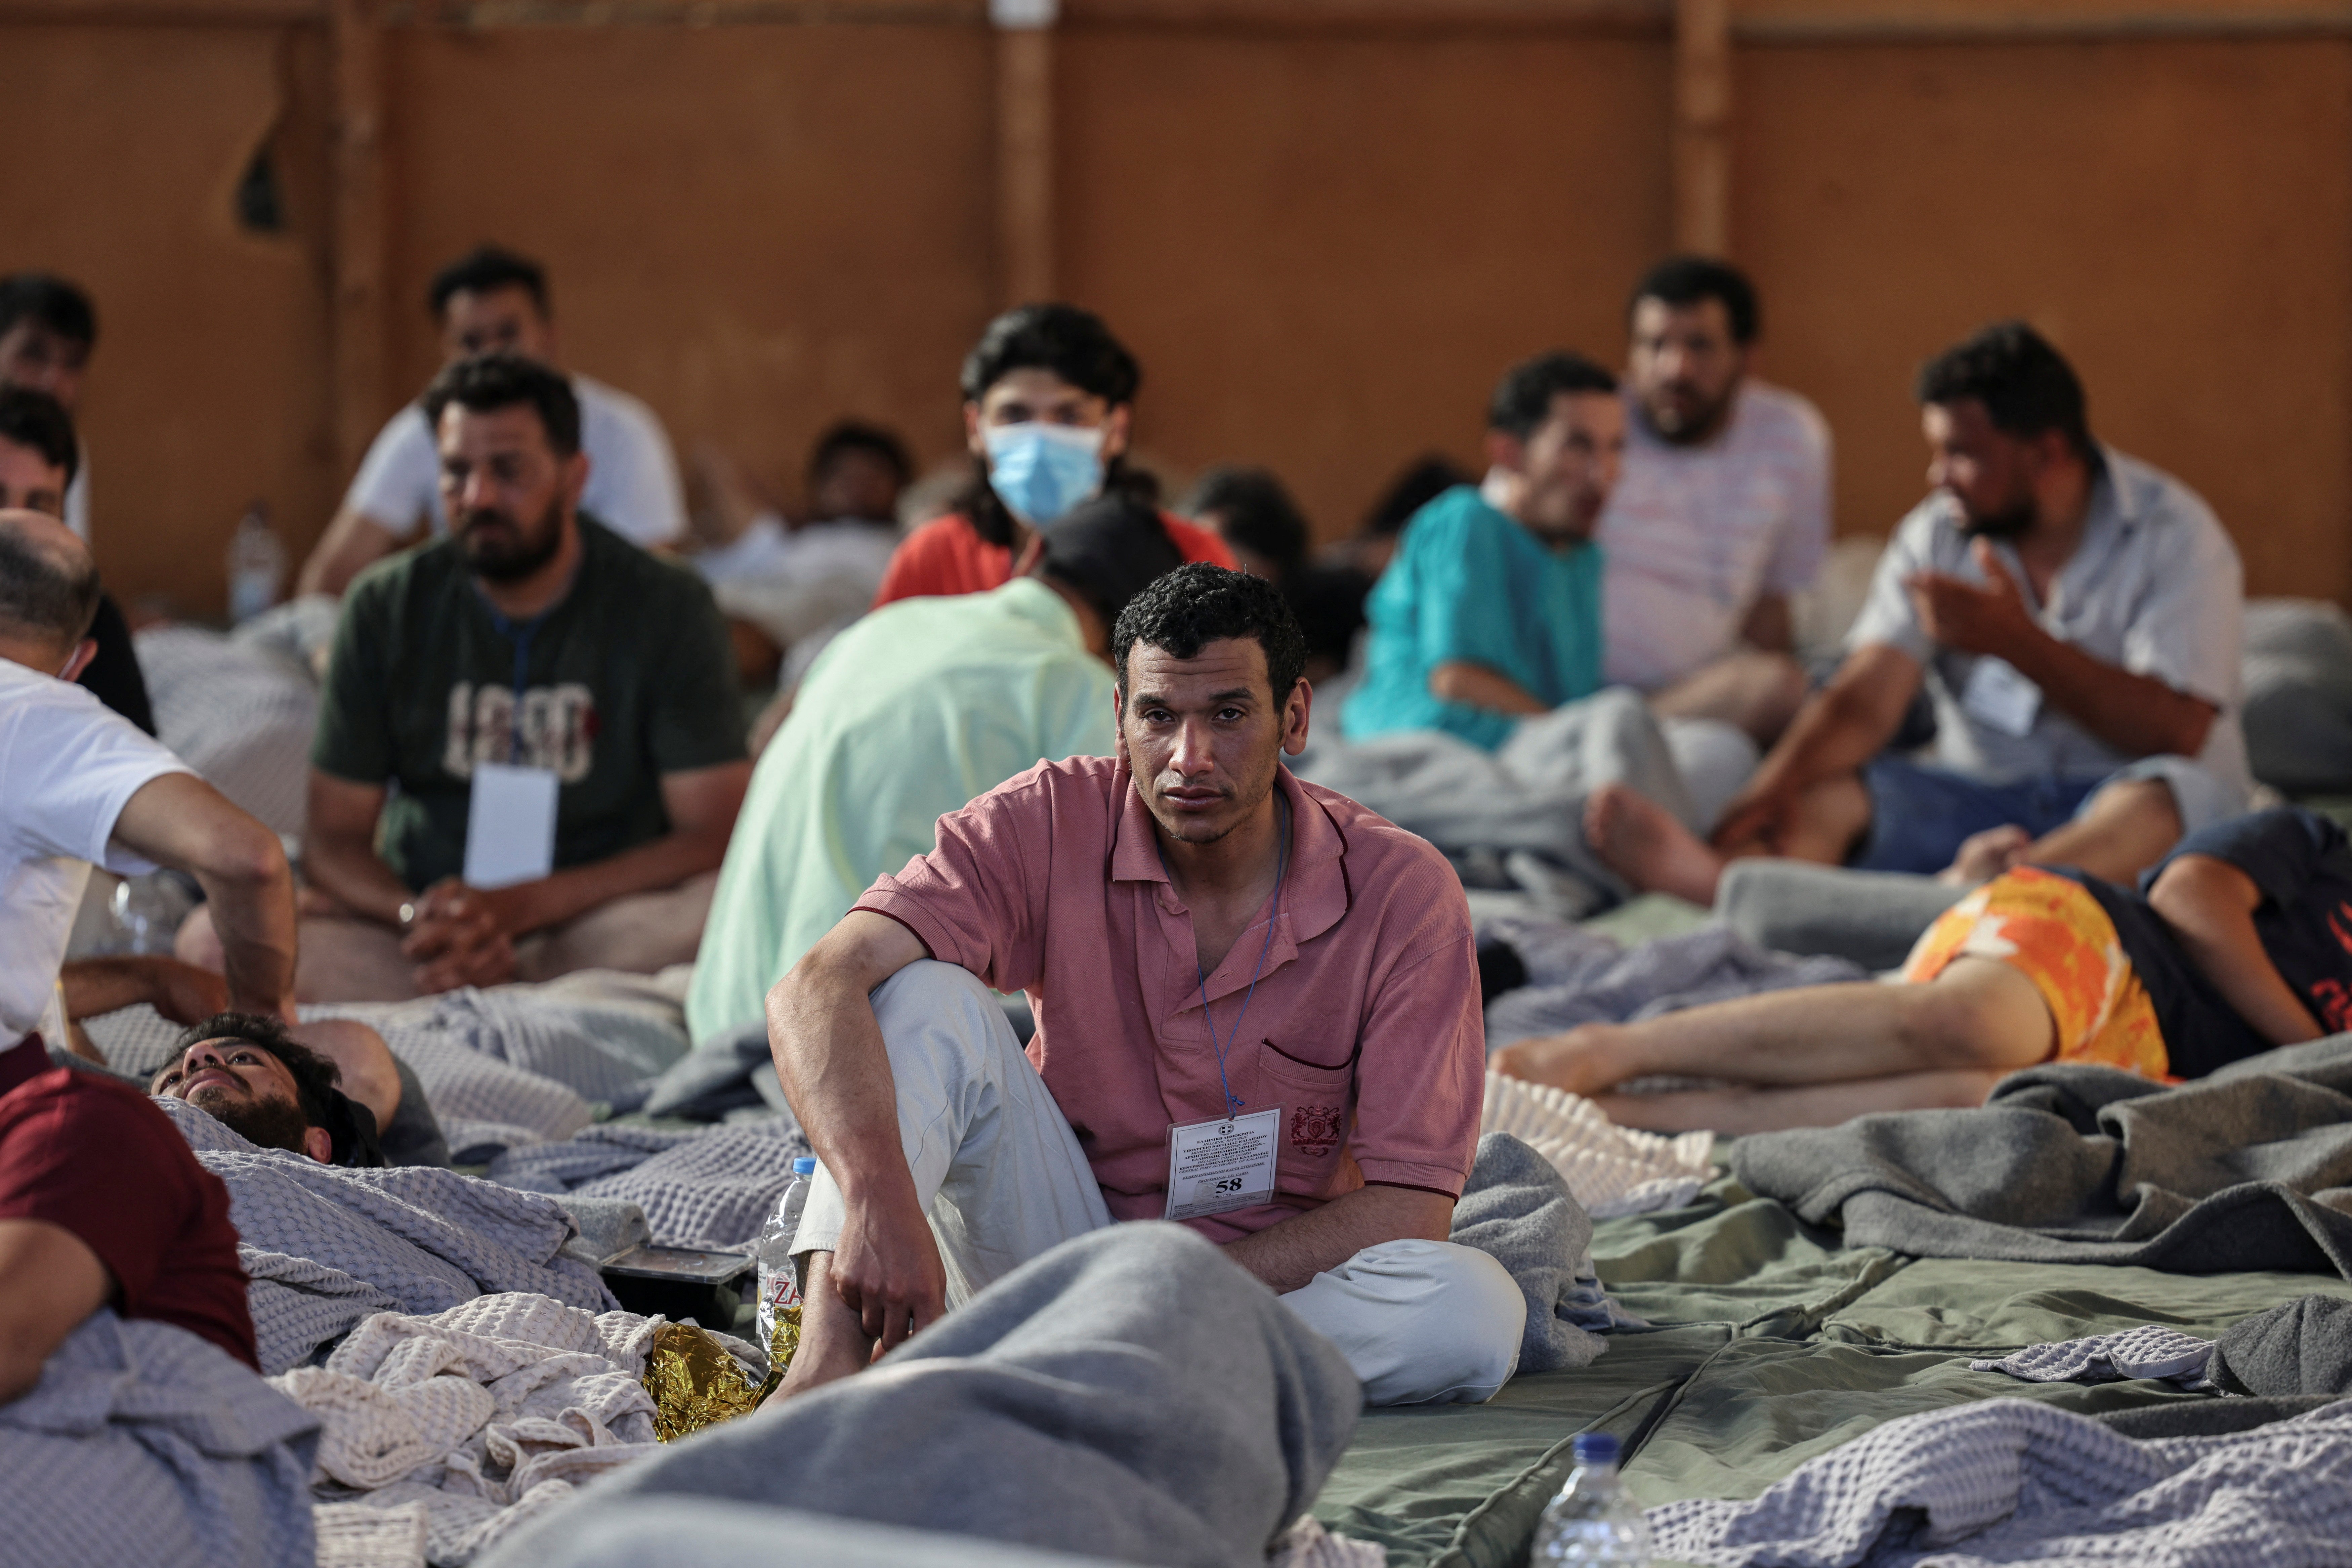 Migrants rest in a shelter in Kalamata, Greece, following their rescue from the Mediterranean